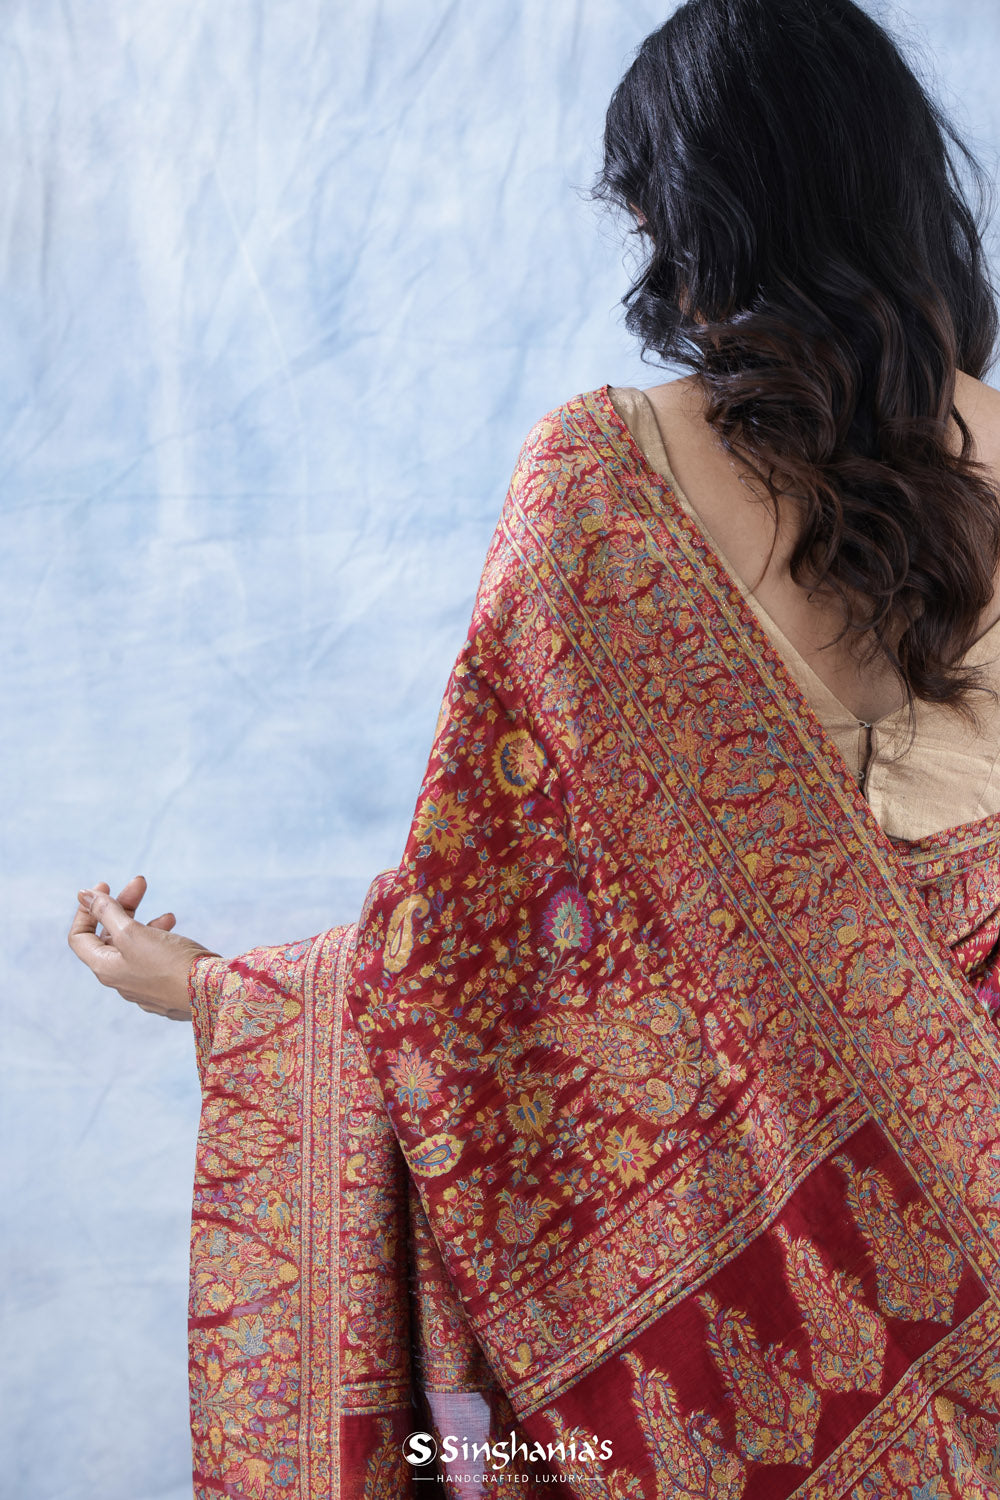 Indian Red Kani Handloom Saree With Floral Motifs